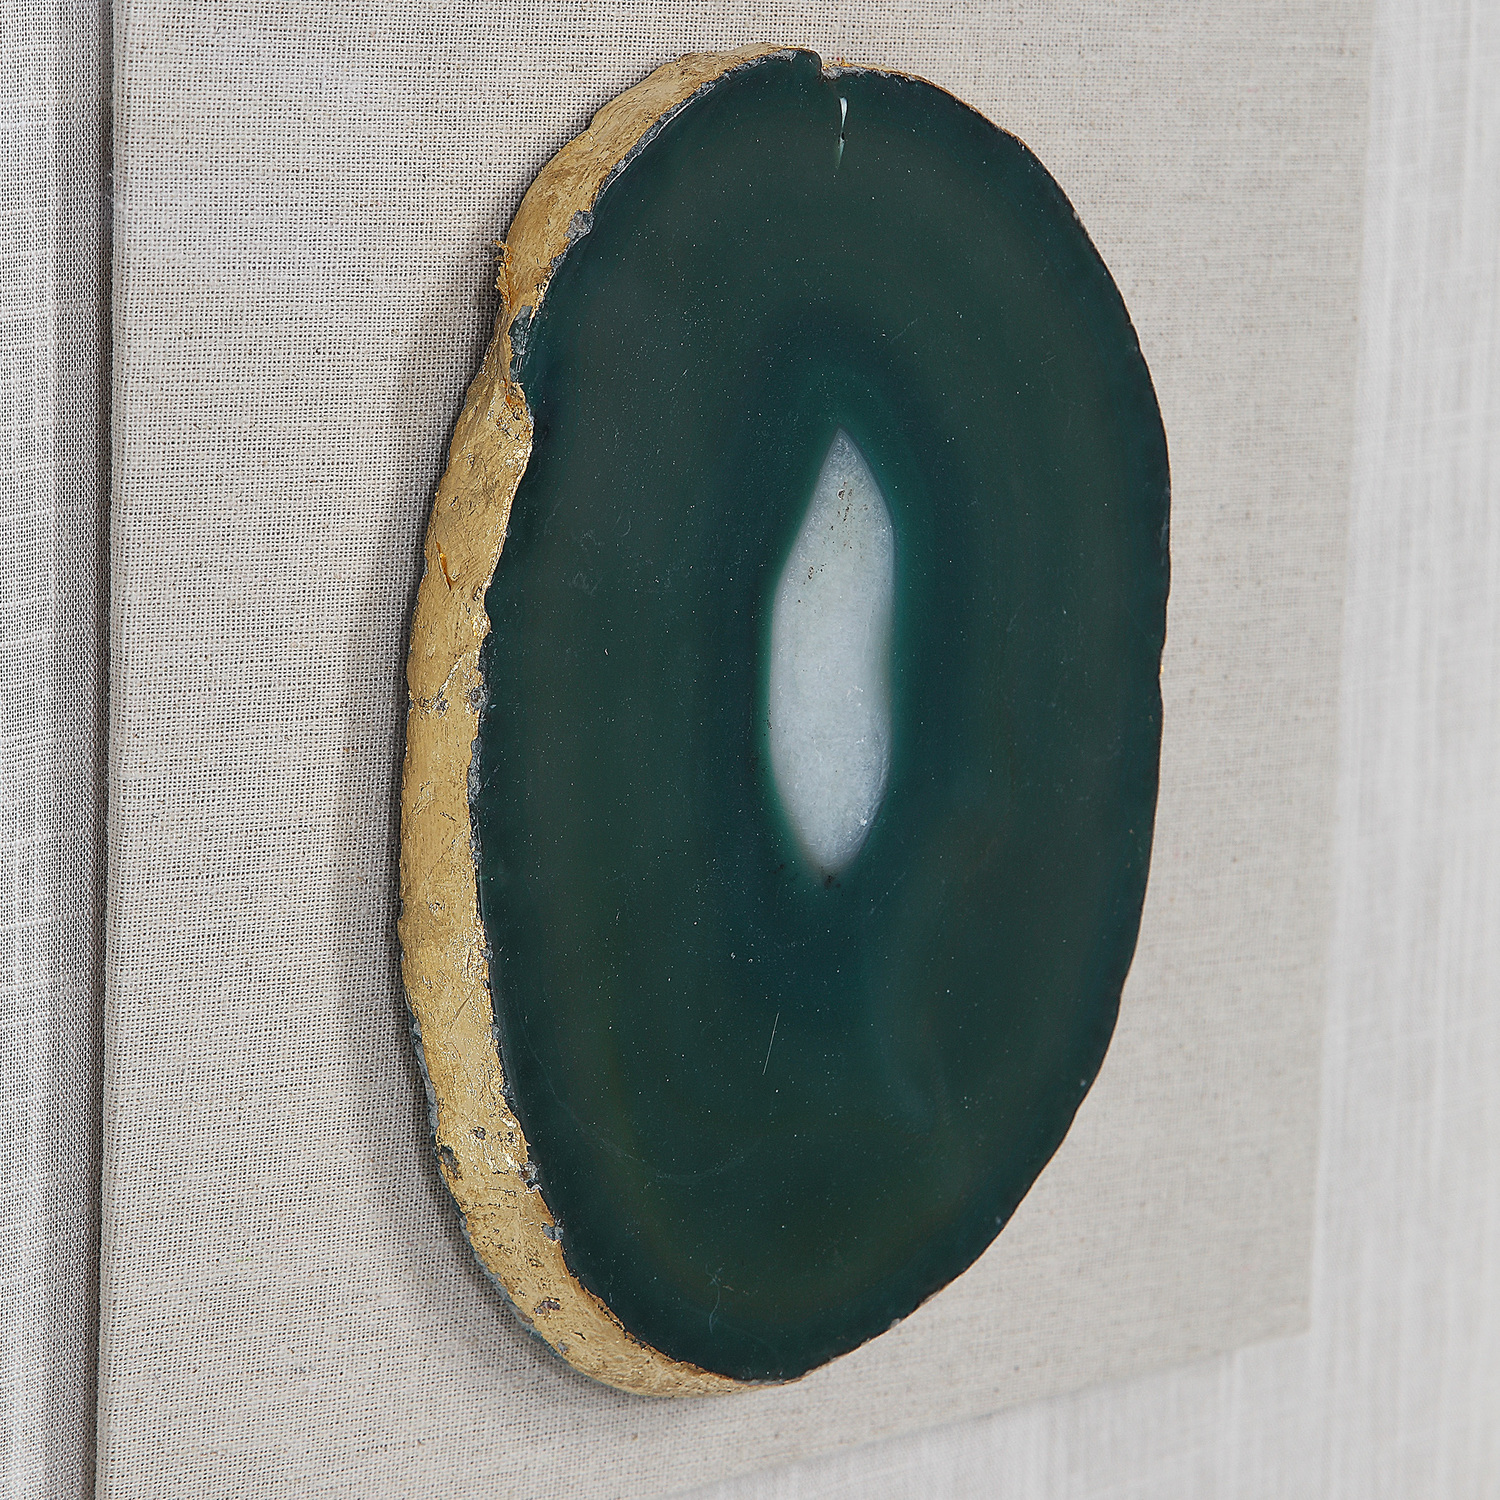  Uttermost Shadow Box Boxes and Bookends A Pine Wood Shadow Box Featuring A Hand Applied Gold Leaf Finish Showcases A Striking Emerald Green Agate Stone With White Veining, Accented With Hand Painted Gold Edging. Mounted On An Off White Linen Backing.